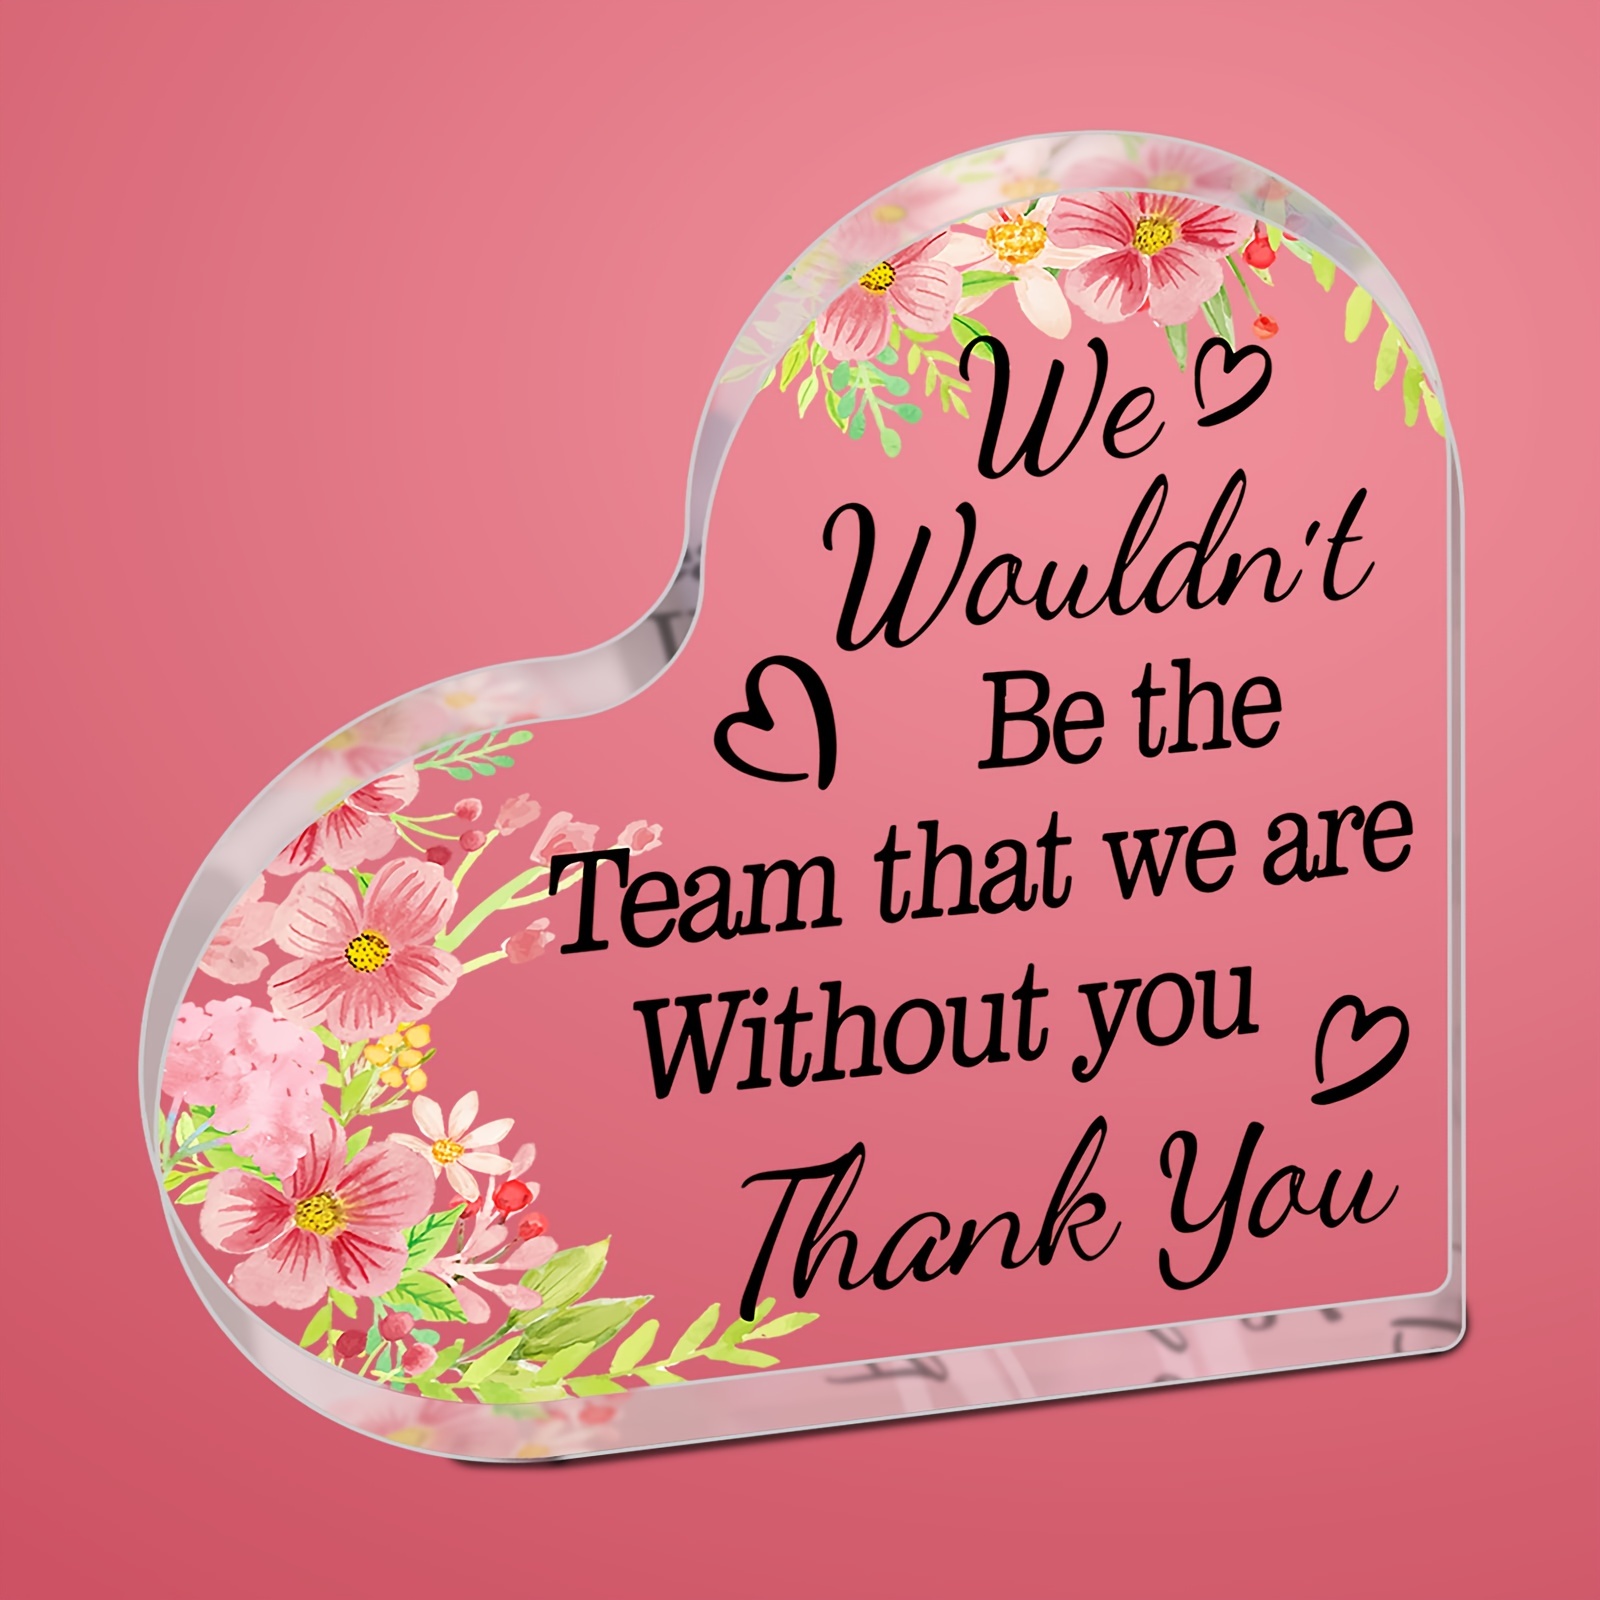 Thank You Gift for Women Inspirational Gifts Coworker Gifts Office Gift for  Colleague Leaving Job Gifts Farewell Gift Appreciation Gifts for Friends